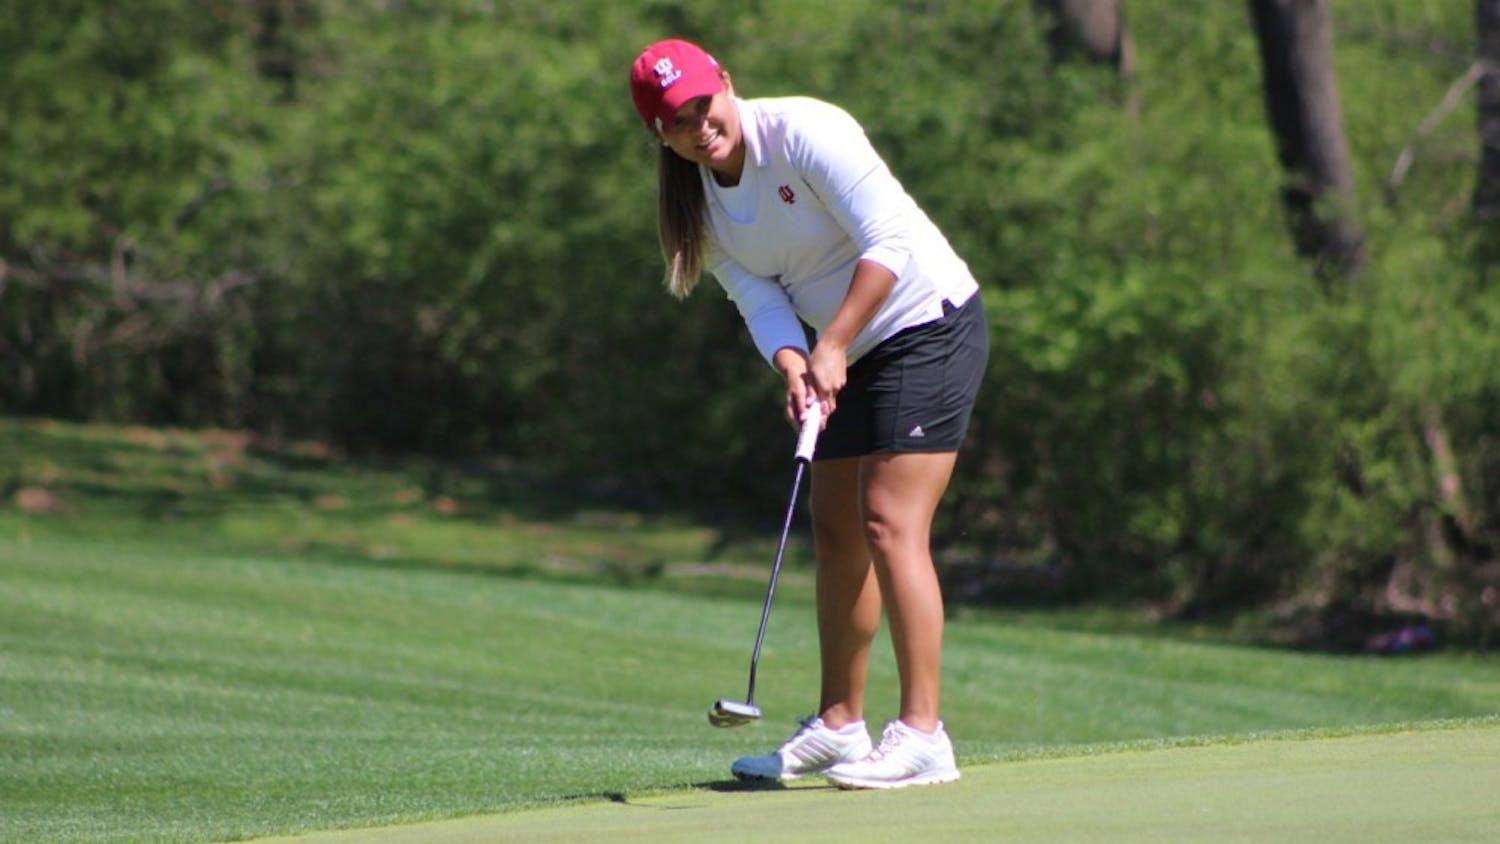 Senior Theresa-Ann Jedra putts during the first round of the IU Invitational at IU Golf Course. The senior posted a 3-over par Saturday after two rounds.